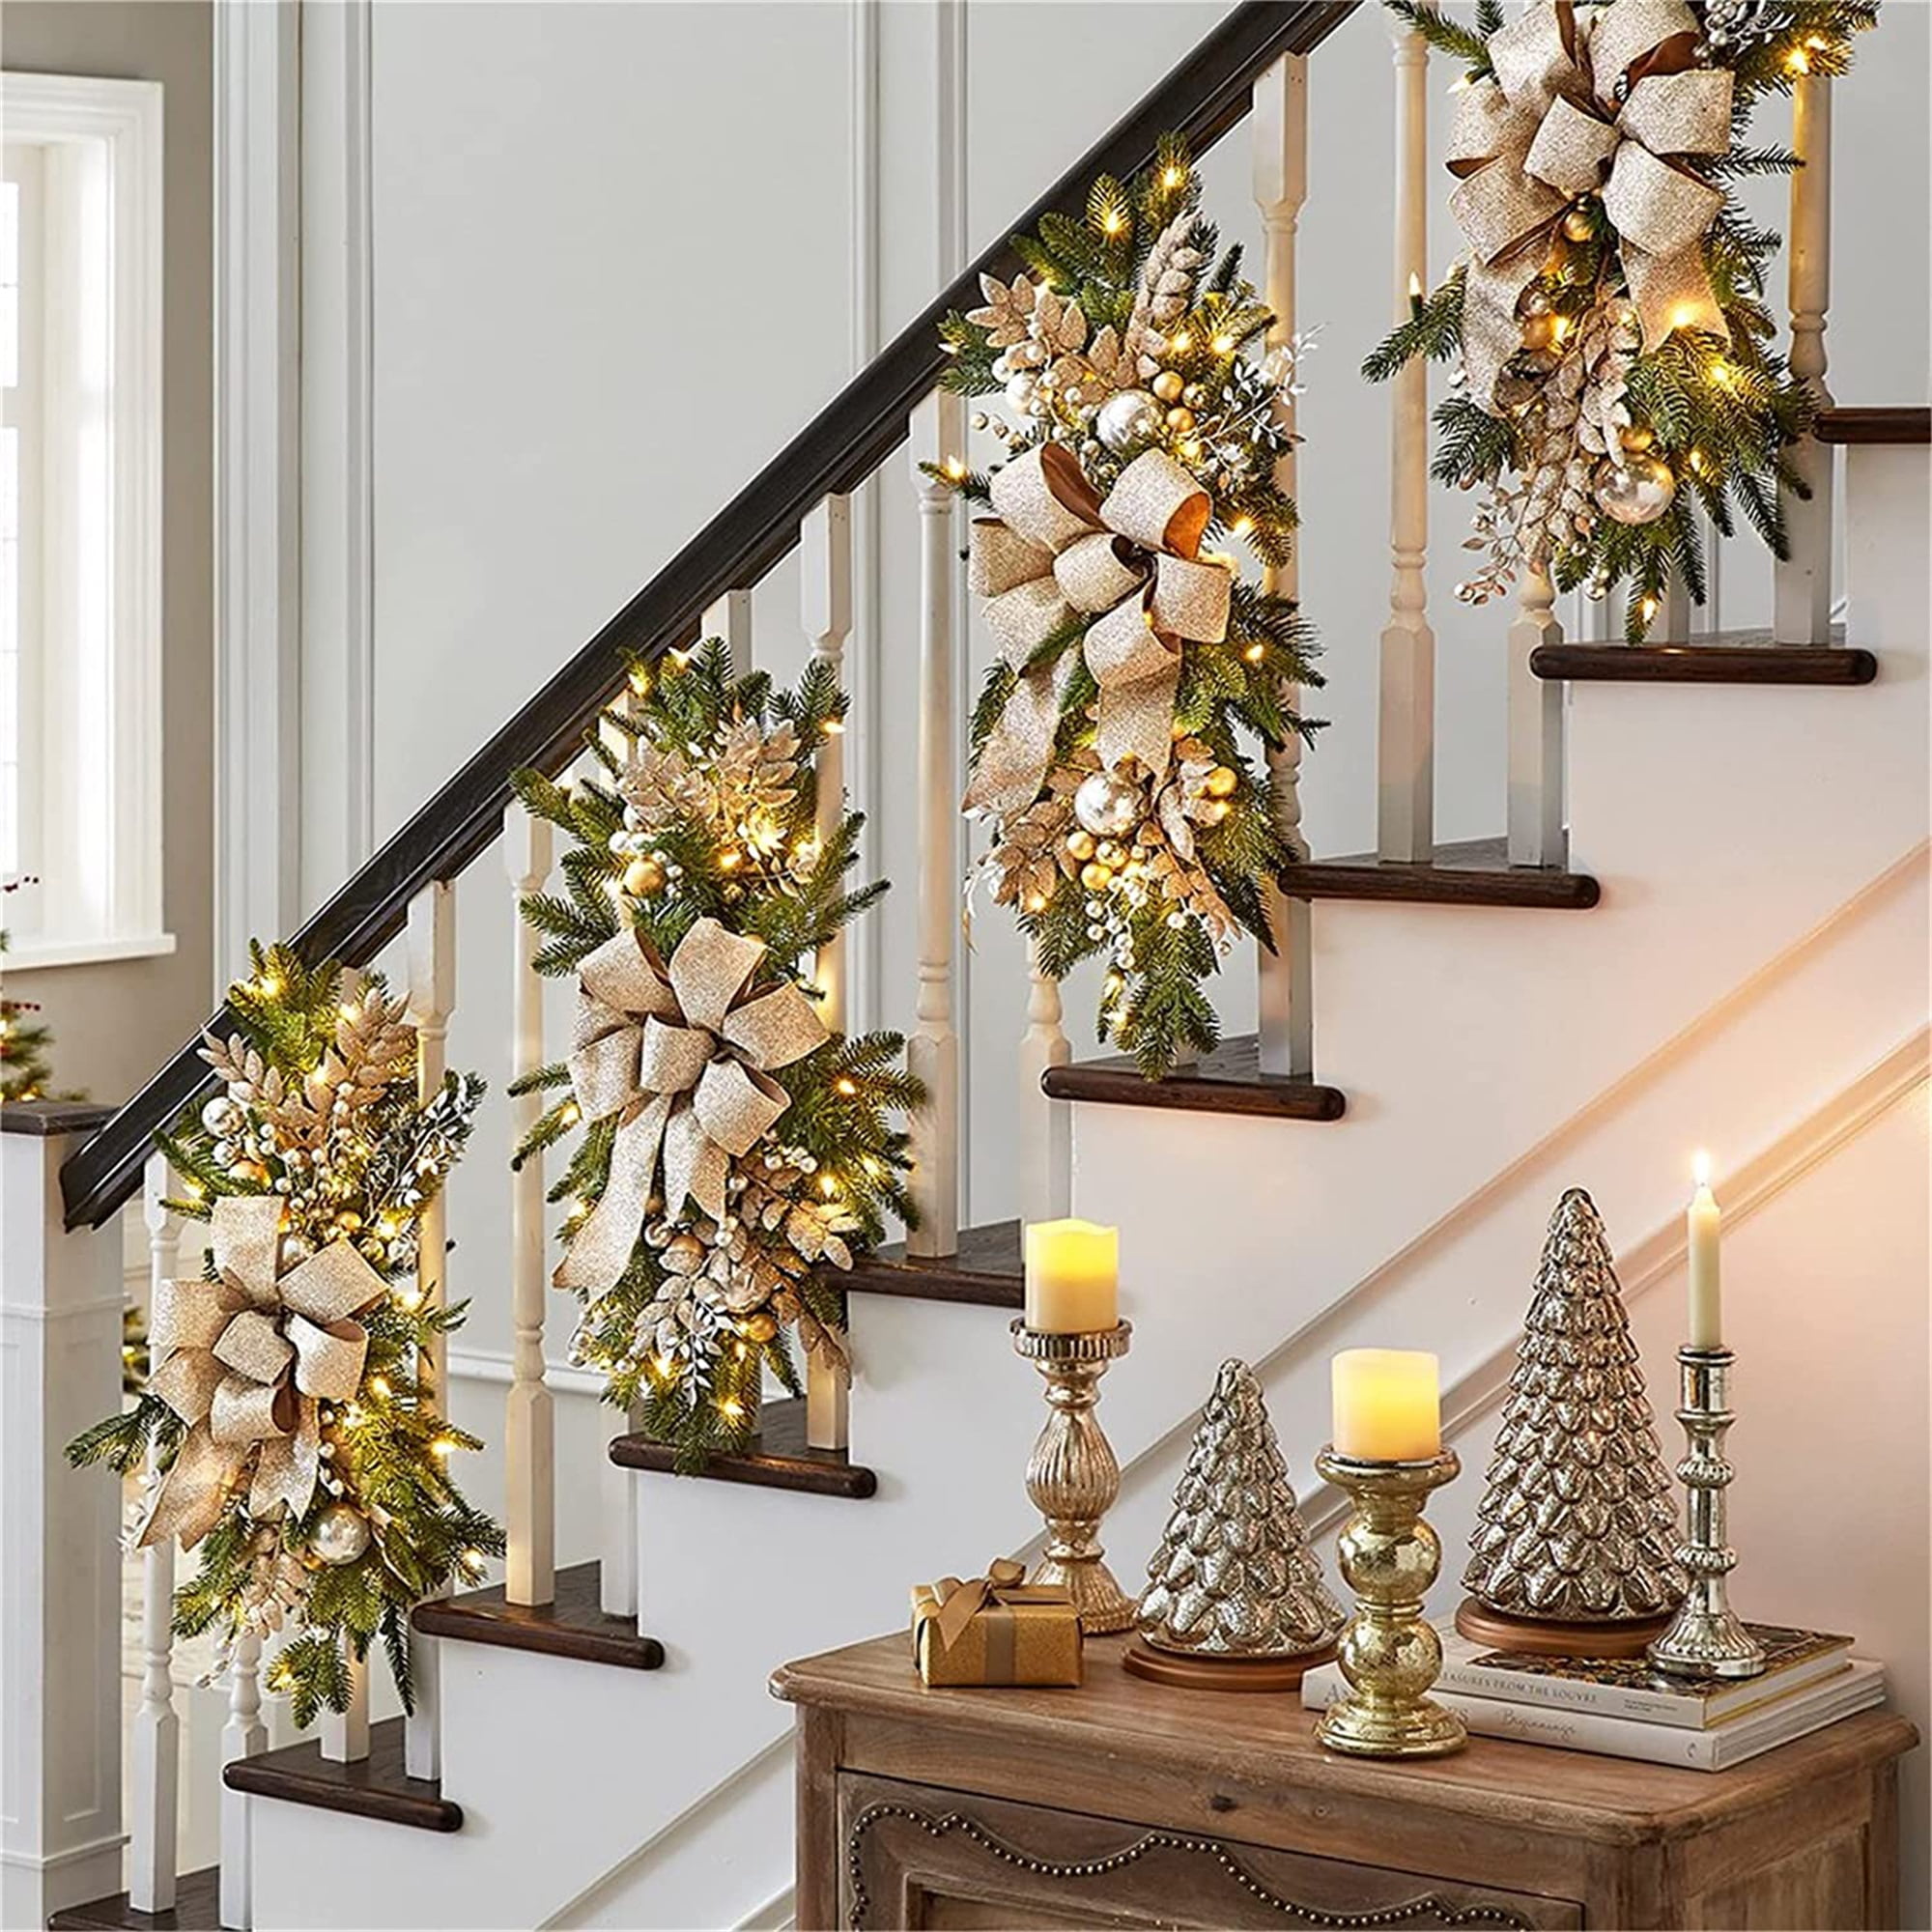 The Best Christmas Stairway Decor Ideas, According to Designers